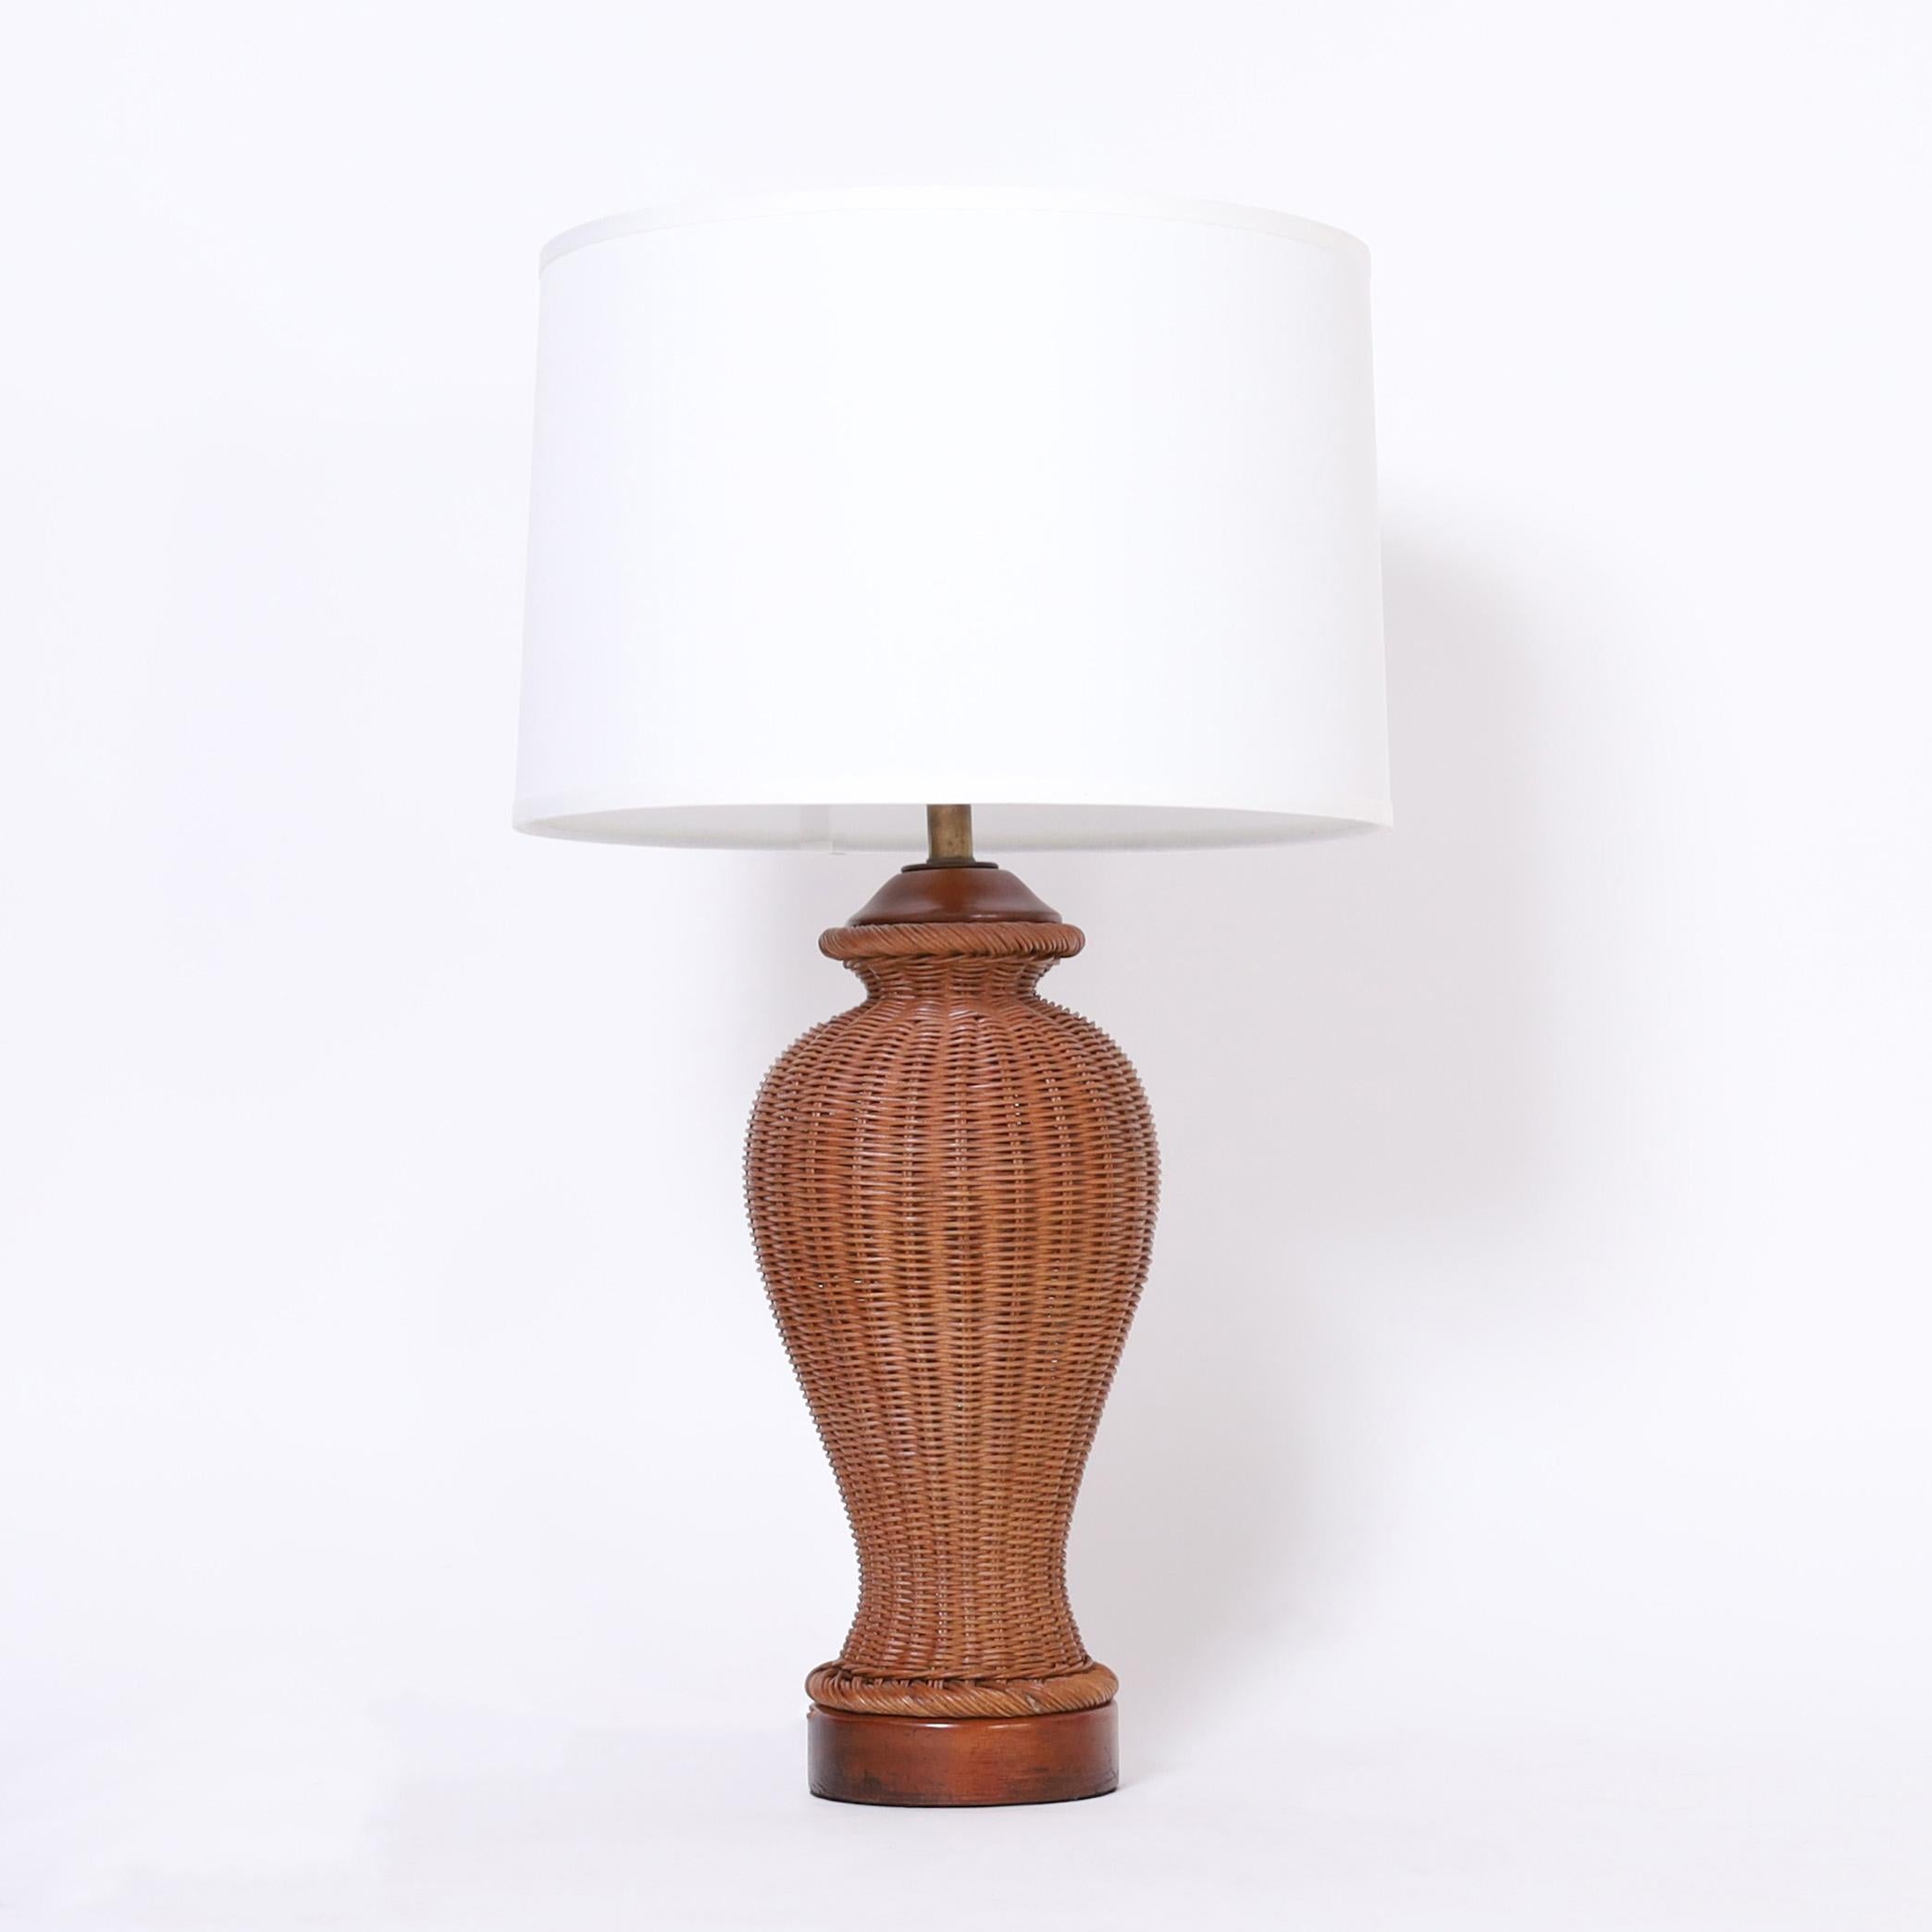 Earthy pair of mid century table lamps crafted in stick wicker in classic form with mahogany caps and bases.